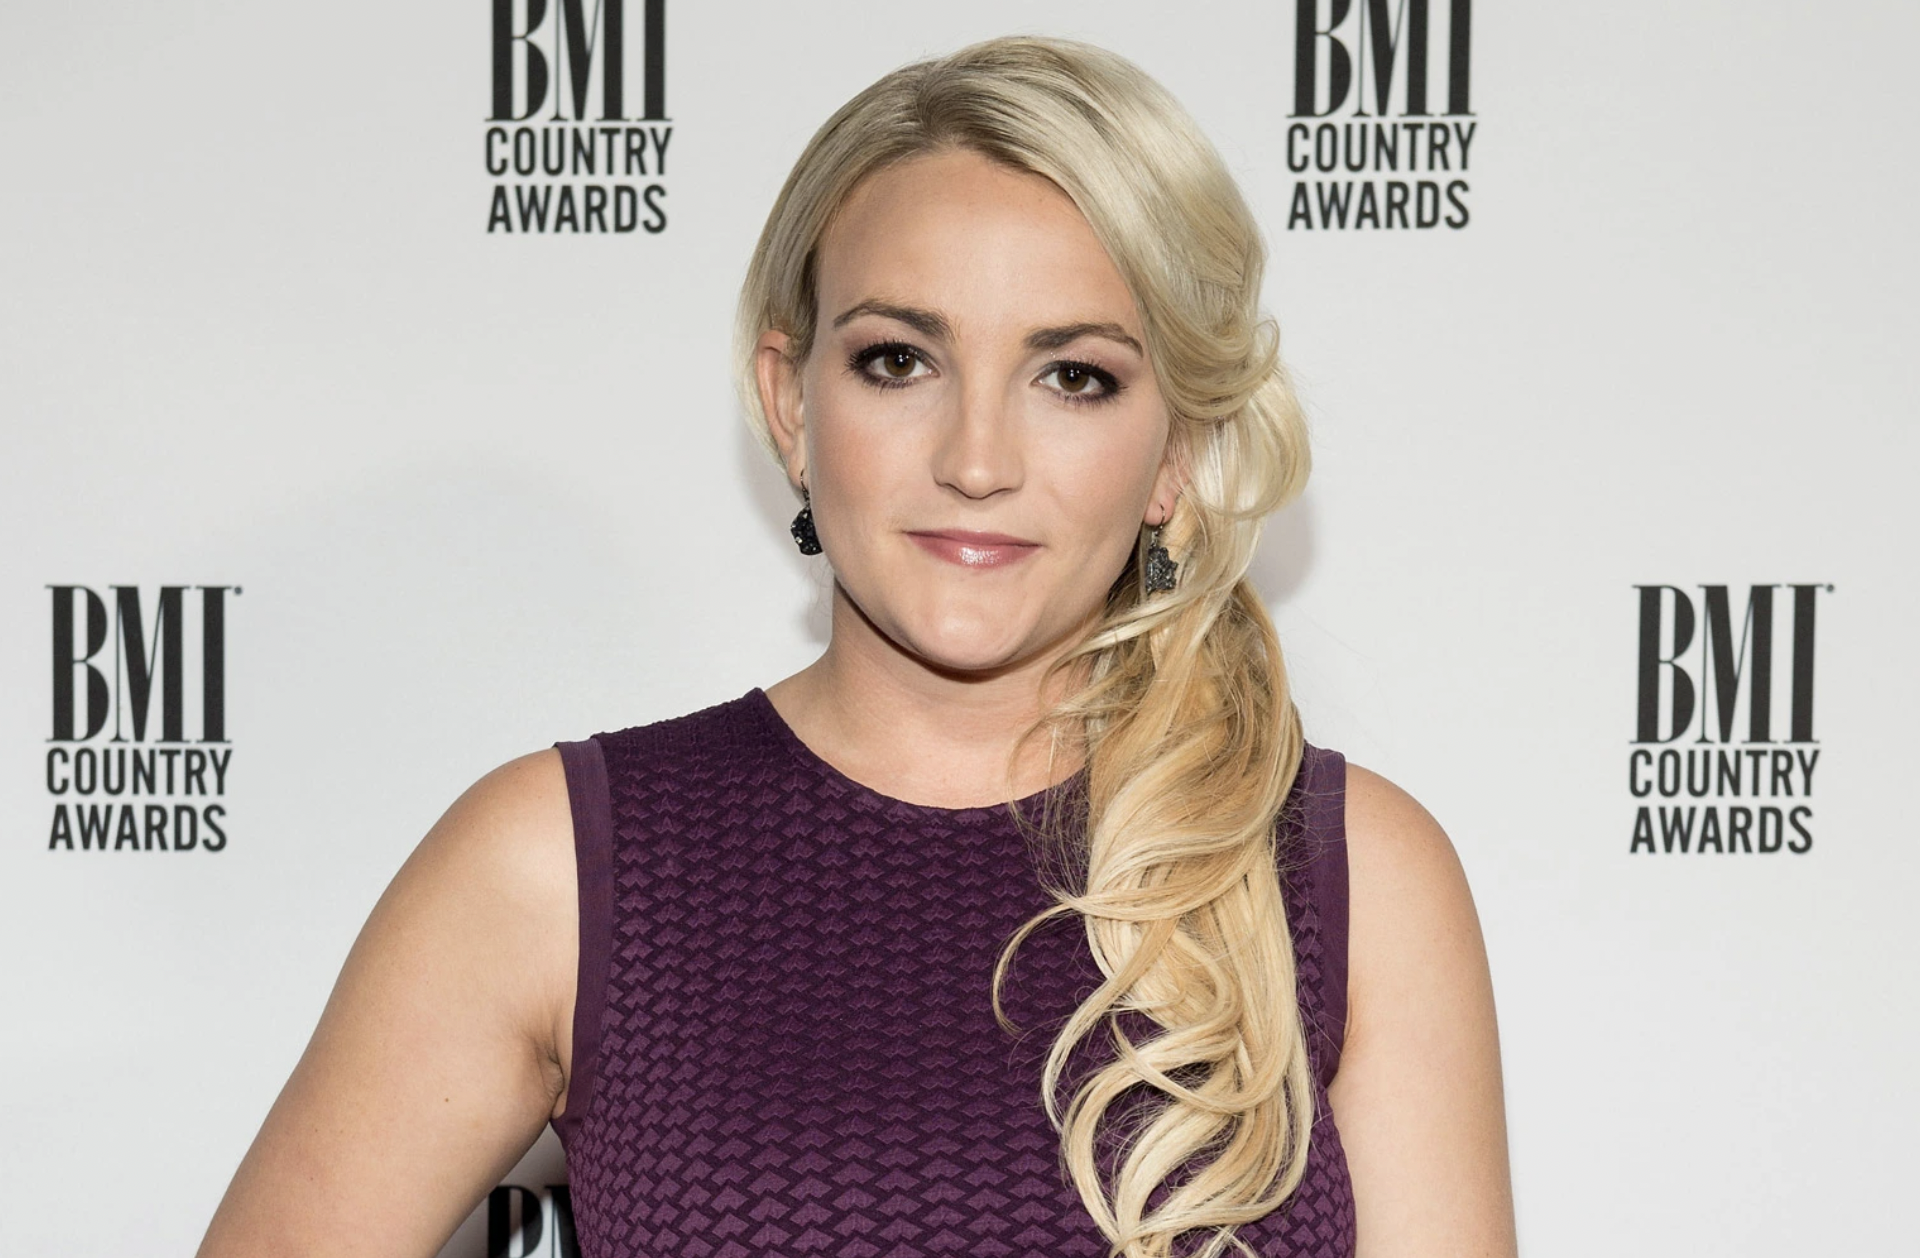 Jamie Lynn Spears To Compete On The Next Season Of ‘Dancing With The Stars’